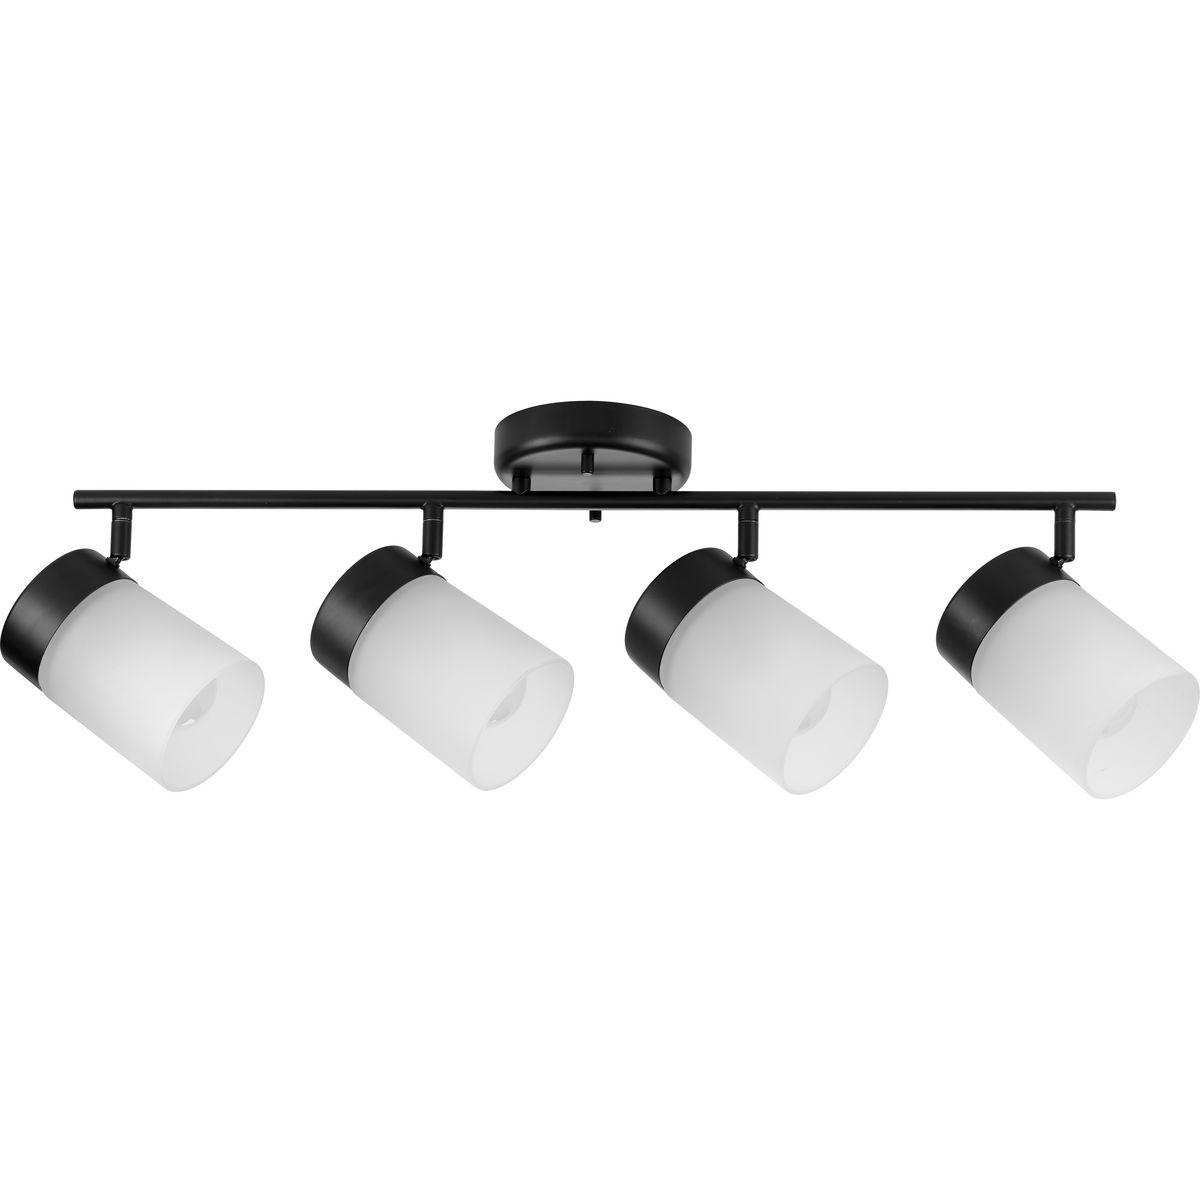 Hubbell P900012-031 Infuse an abundance of sophisticated versatile light to an commercial or residential setting with this brushed nickel four-head track light fixture. Multi-directional lamp heads provide design flexibility and illuminate typically hard-to-reach areas. The 